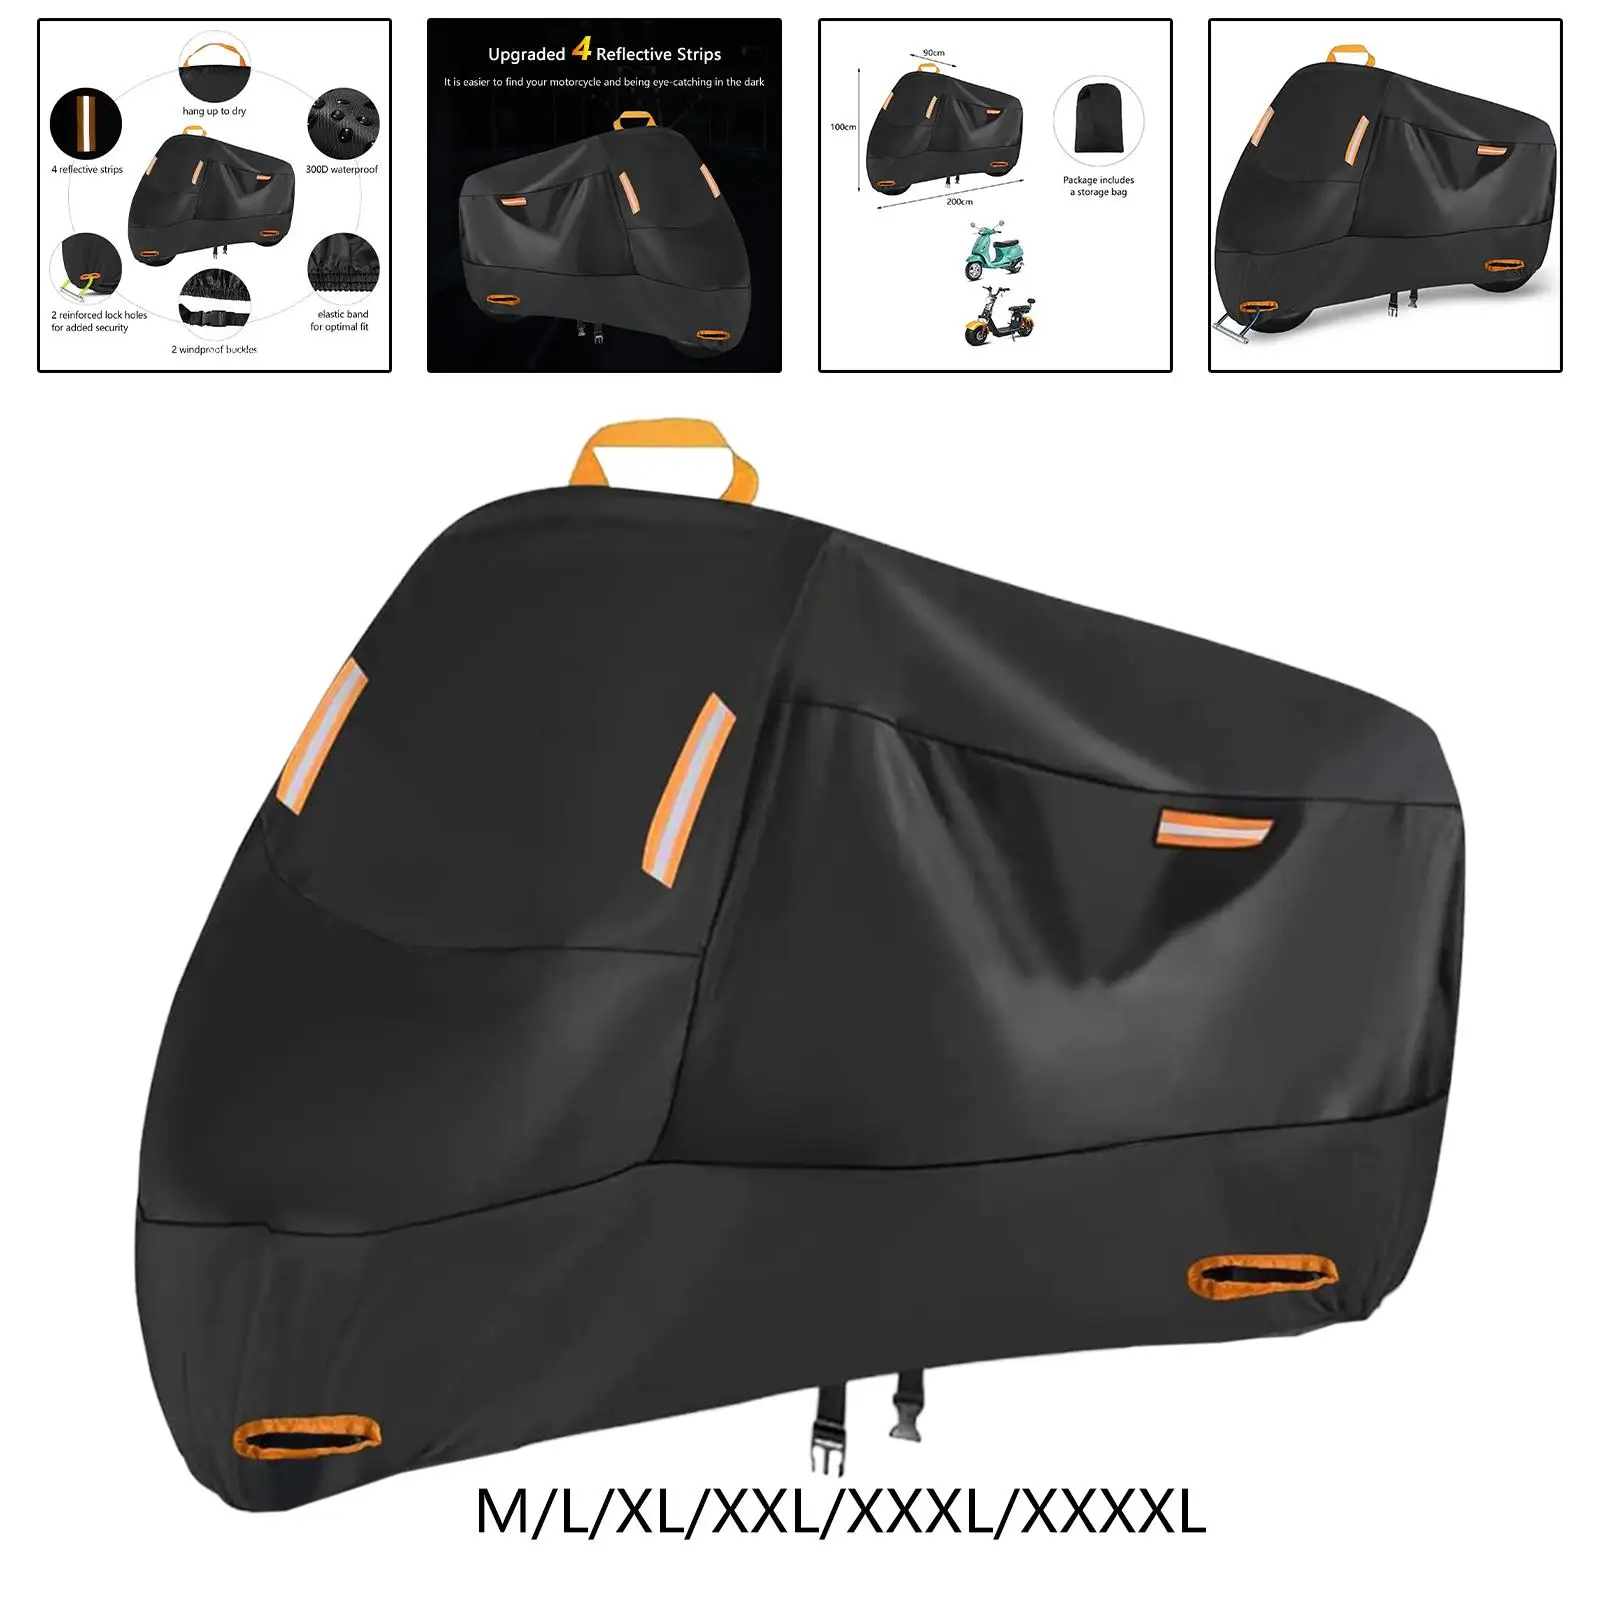 210D Motorcycle Cover Waterproof Motorbike Rain Cover for Scooter Bike